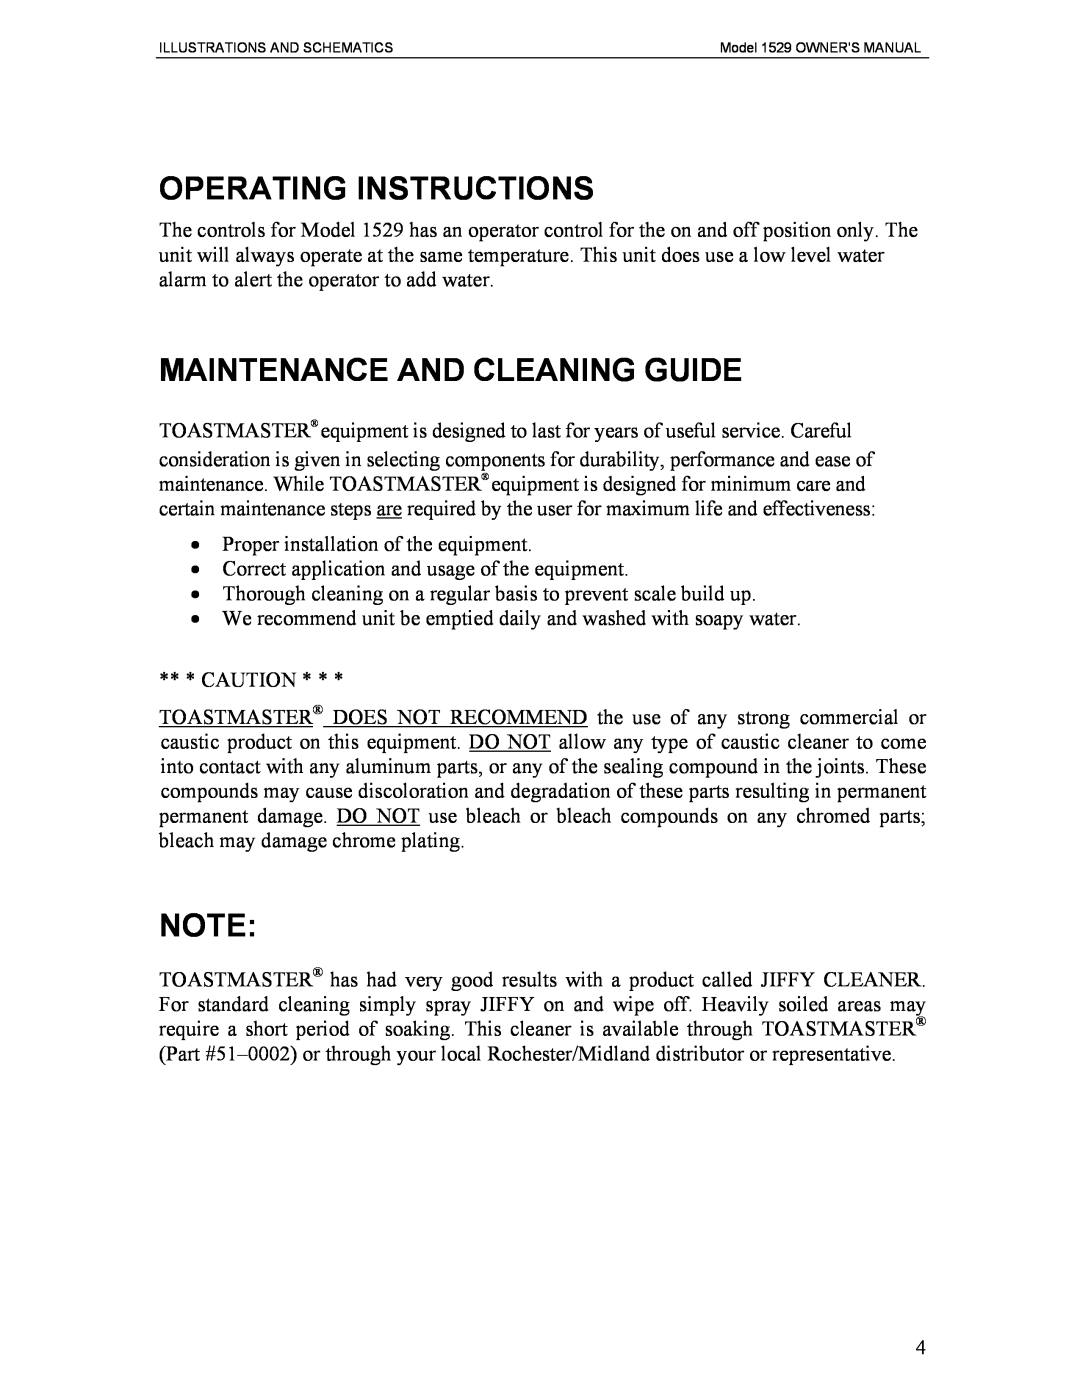 Toastmaster 1529 owner manual Operating Instructions, Maintenance And Cleaning Guide 